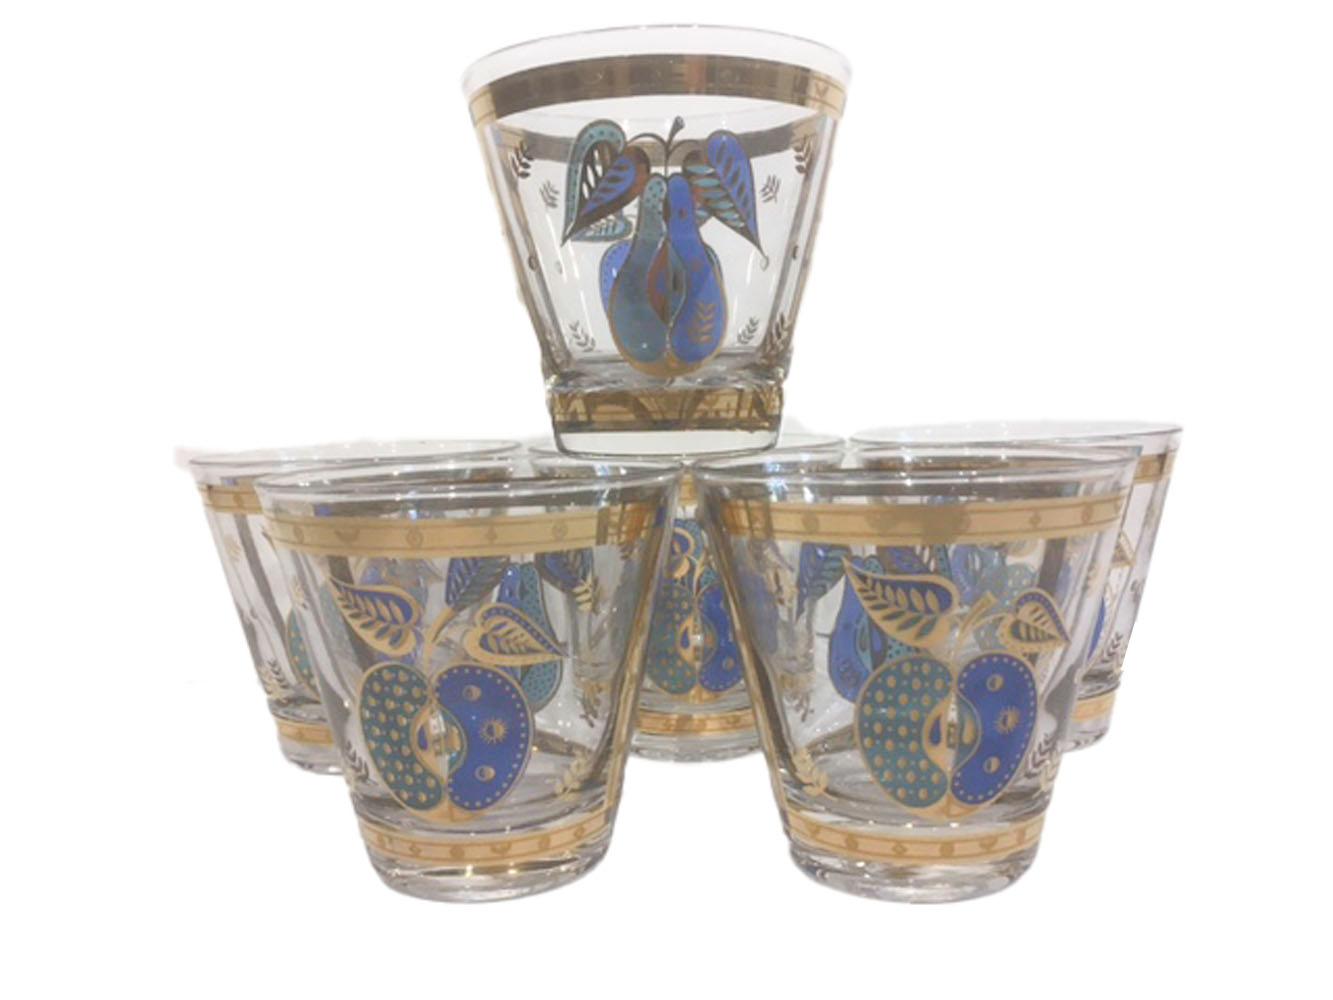 Set of six Mid-Century Modern old fashioned glasses by Georges Briard in the Forbidden Fruit pattern. Each of clear glass decorated in translucent blue and green enamel and 22 karat gold. Each glass has a pear on one side and an apple on the other